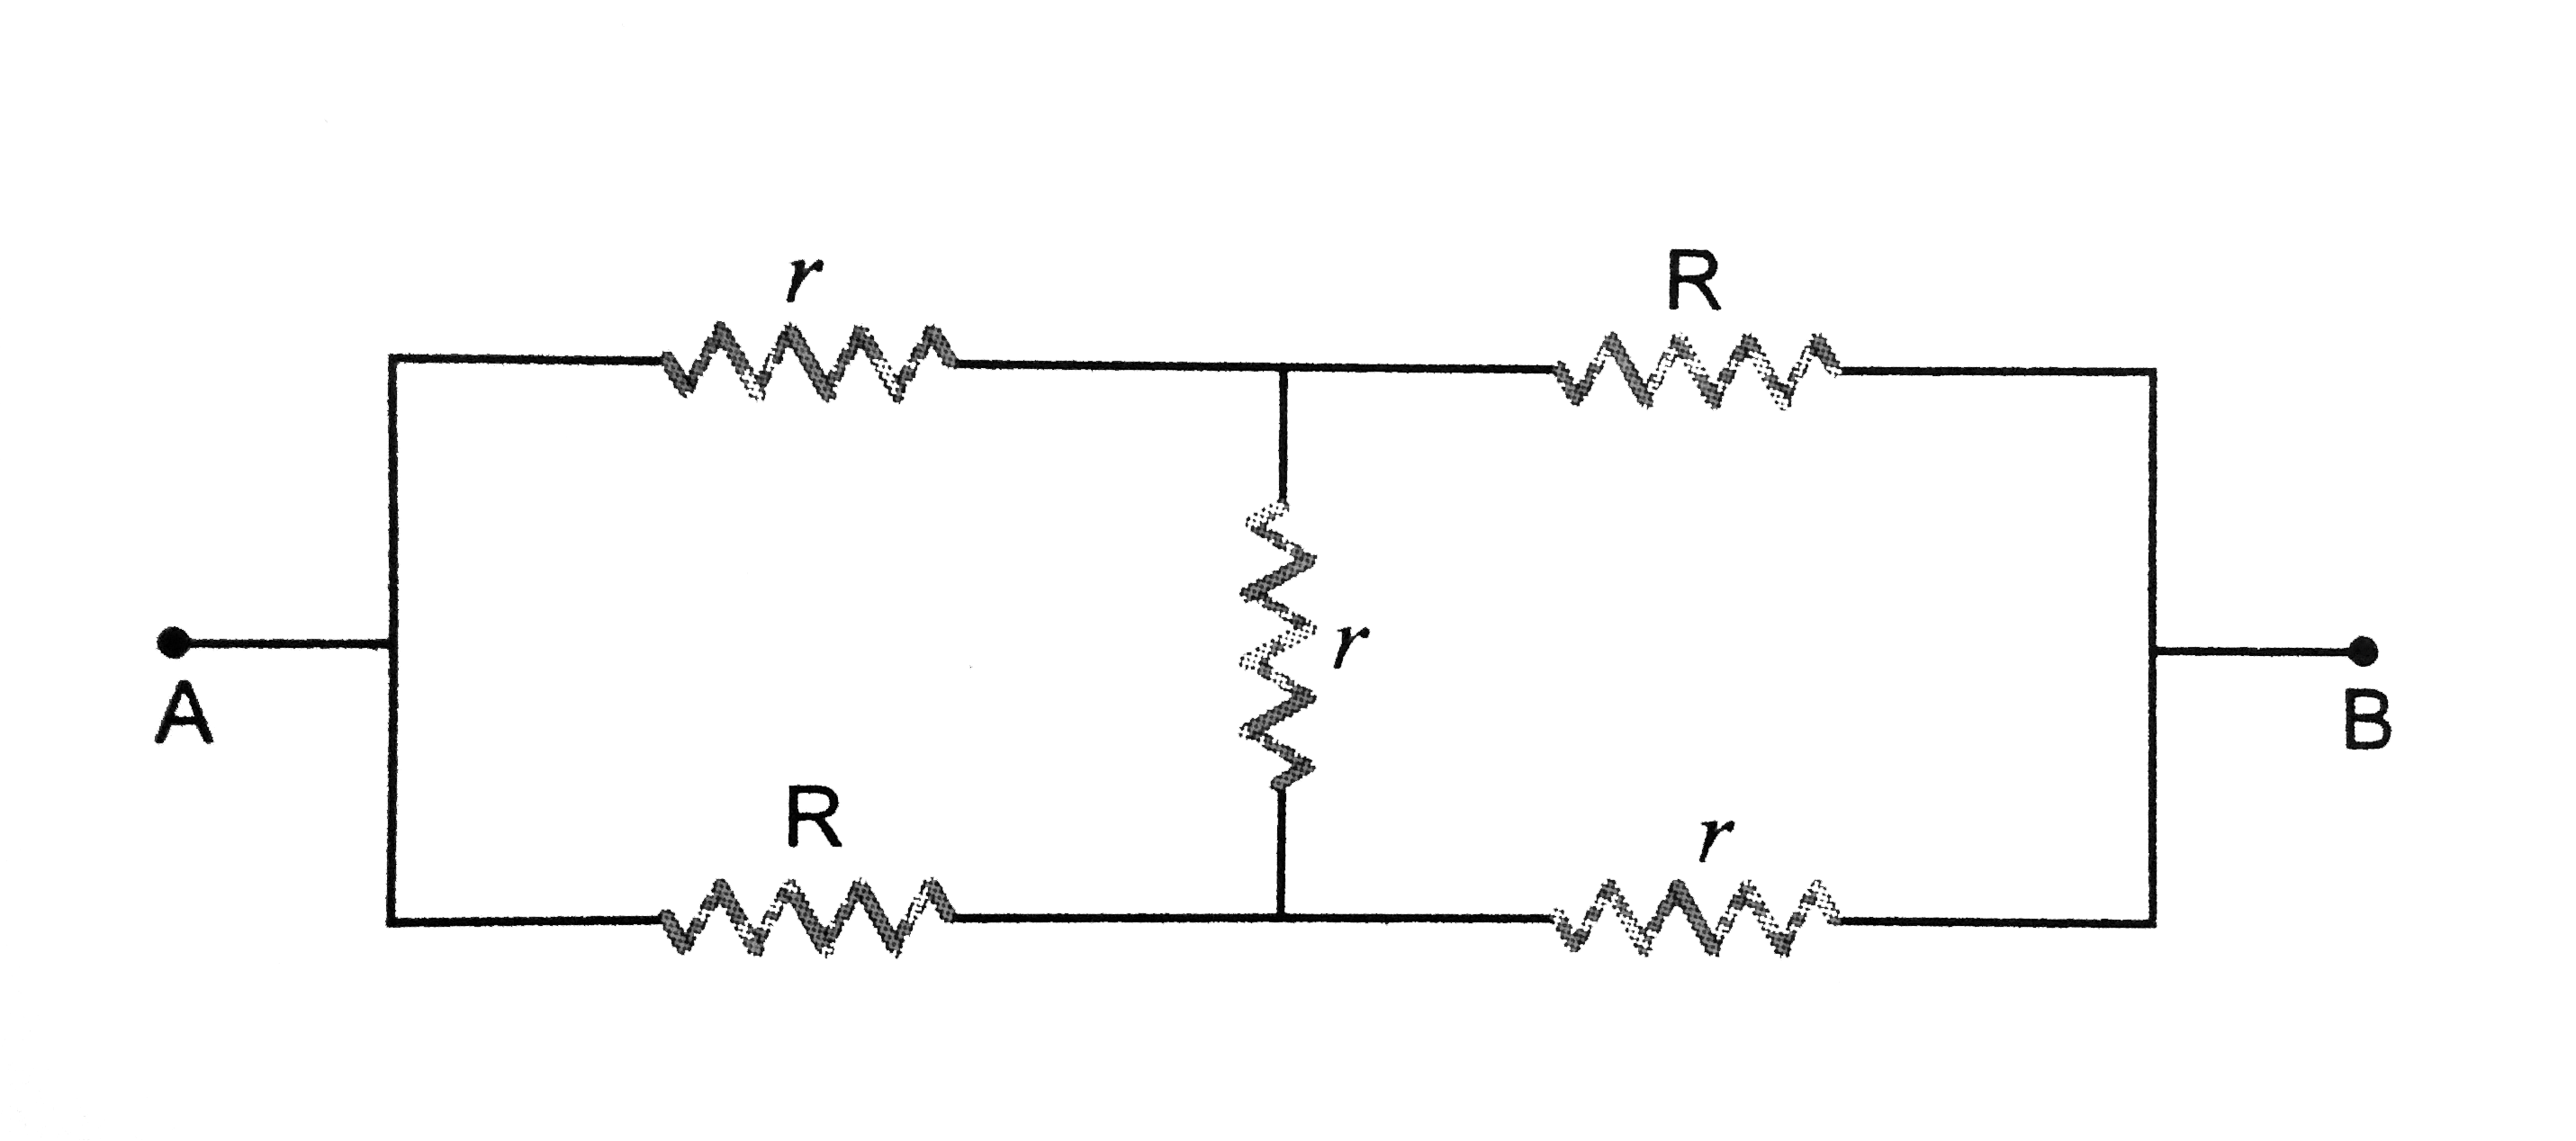 Calculate the equivalent resistance between the points A and B of the net-work shown in Fig. MTP 2.1.